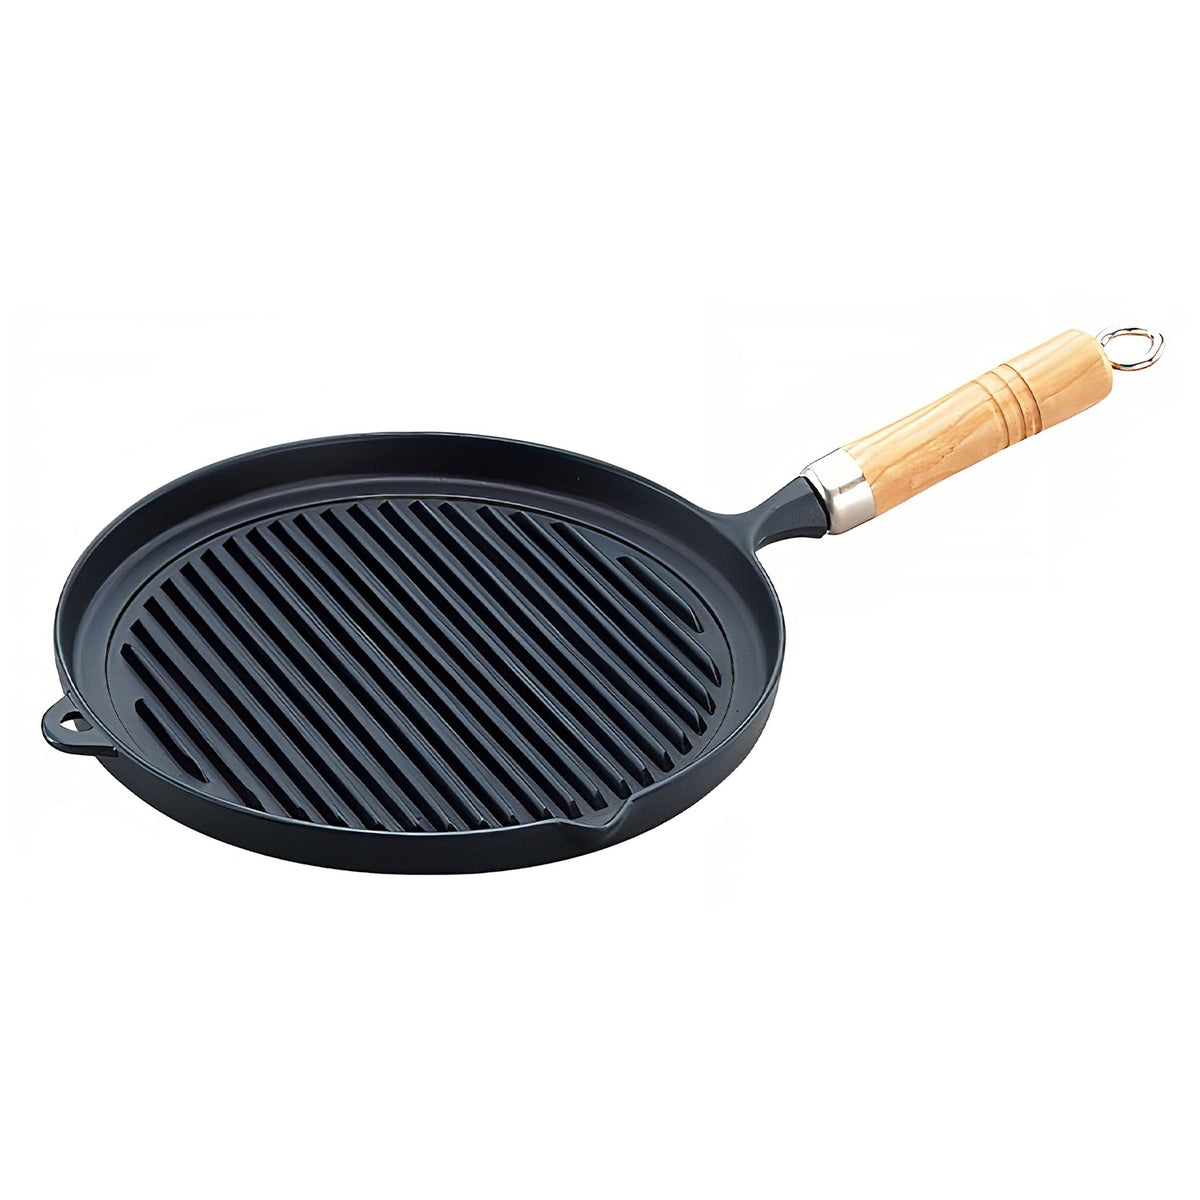 This Cast Iron Scrubber Has Over 1,700 5-Star Reviews